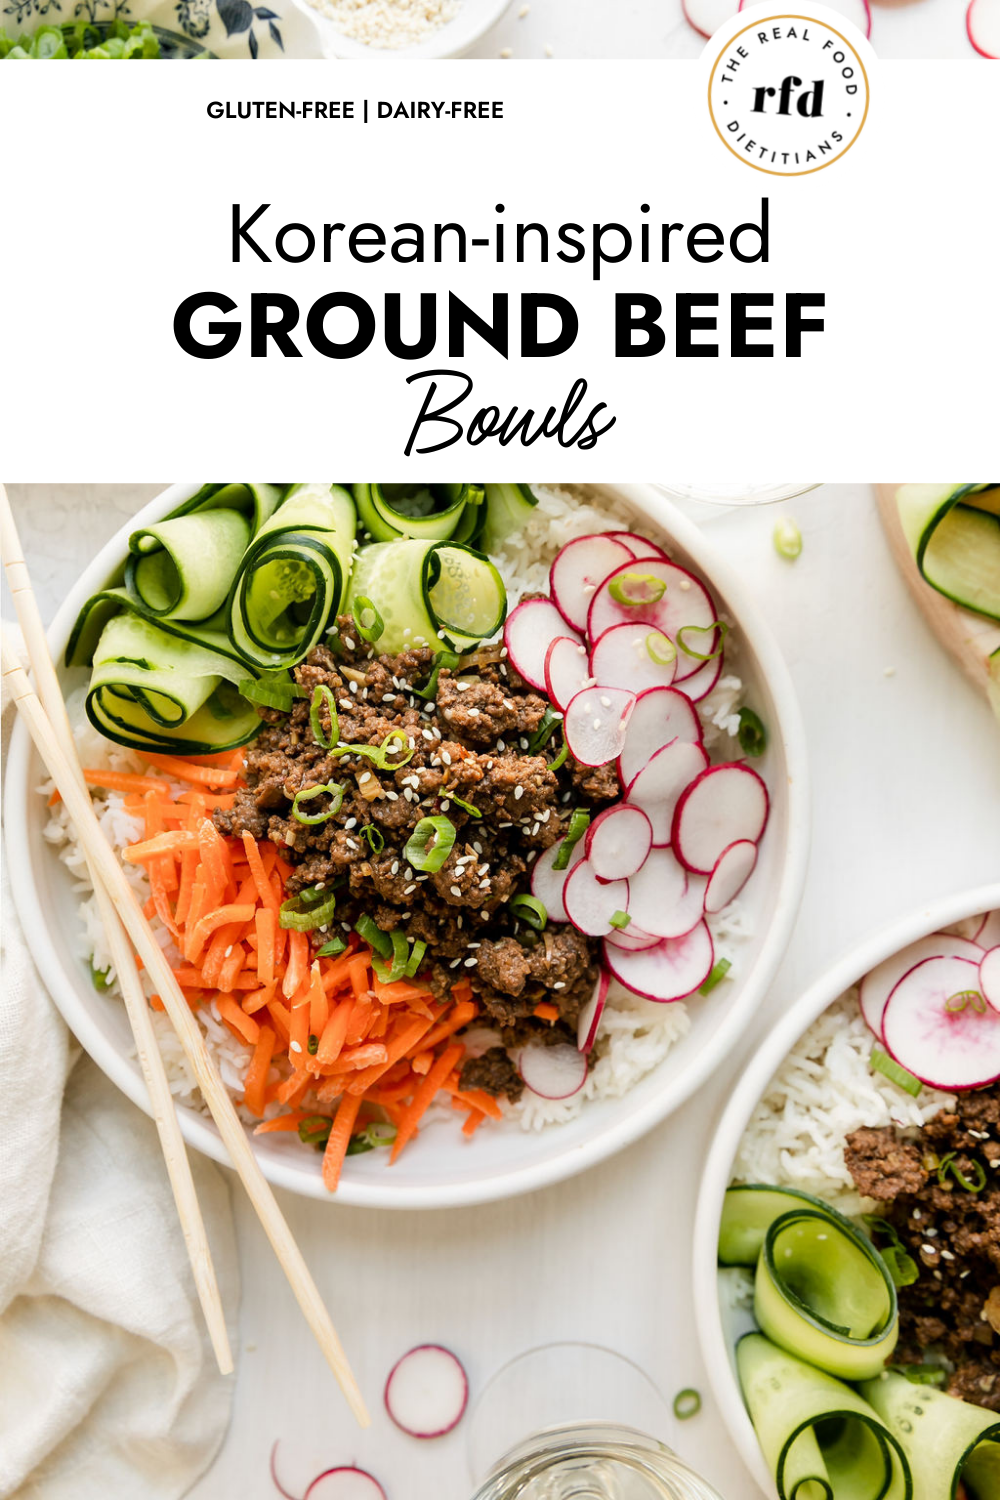 https://therealfooddietitians.com/wp-content/uploads/2022/05/Korean-Inspired-Ground-Beef-Bowls-1000-%C3%97-1500-px.png